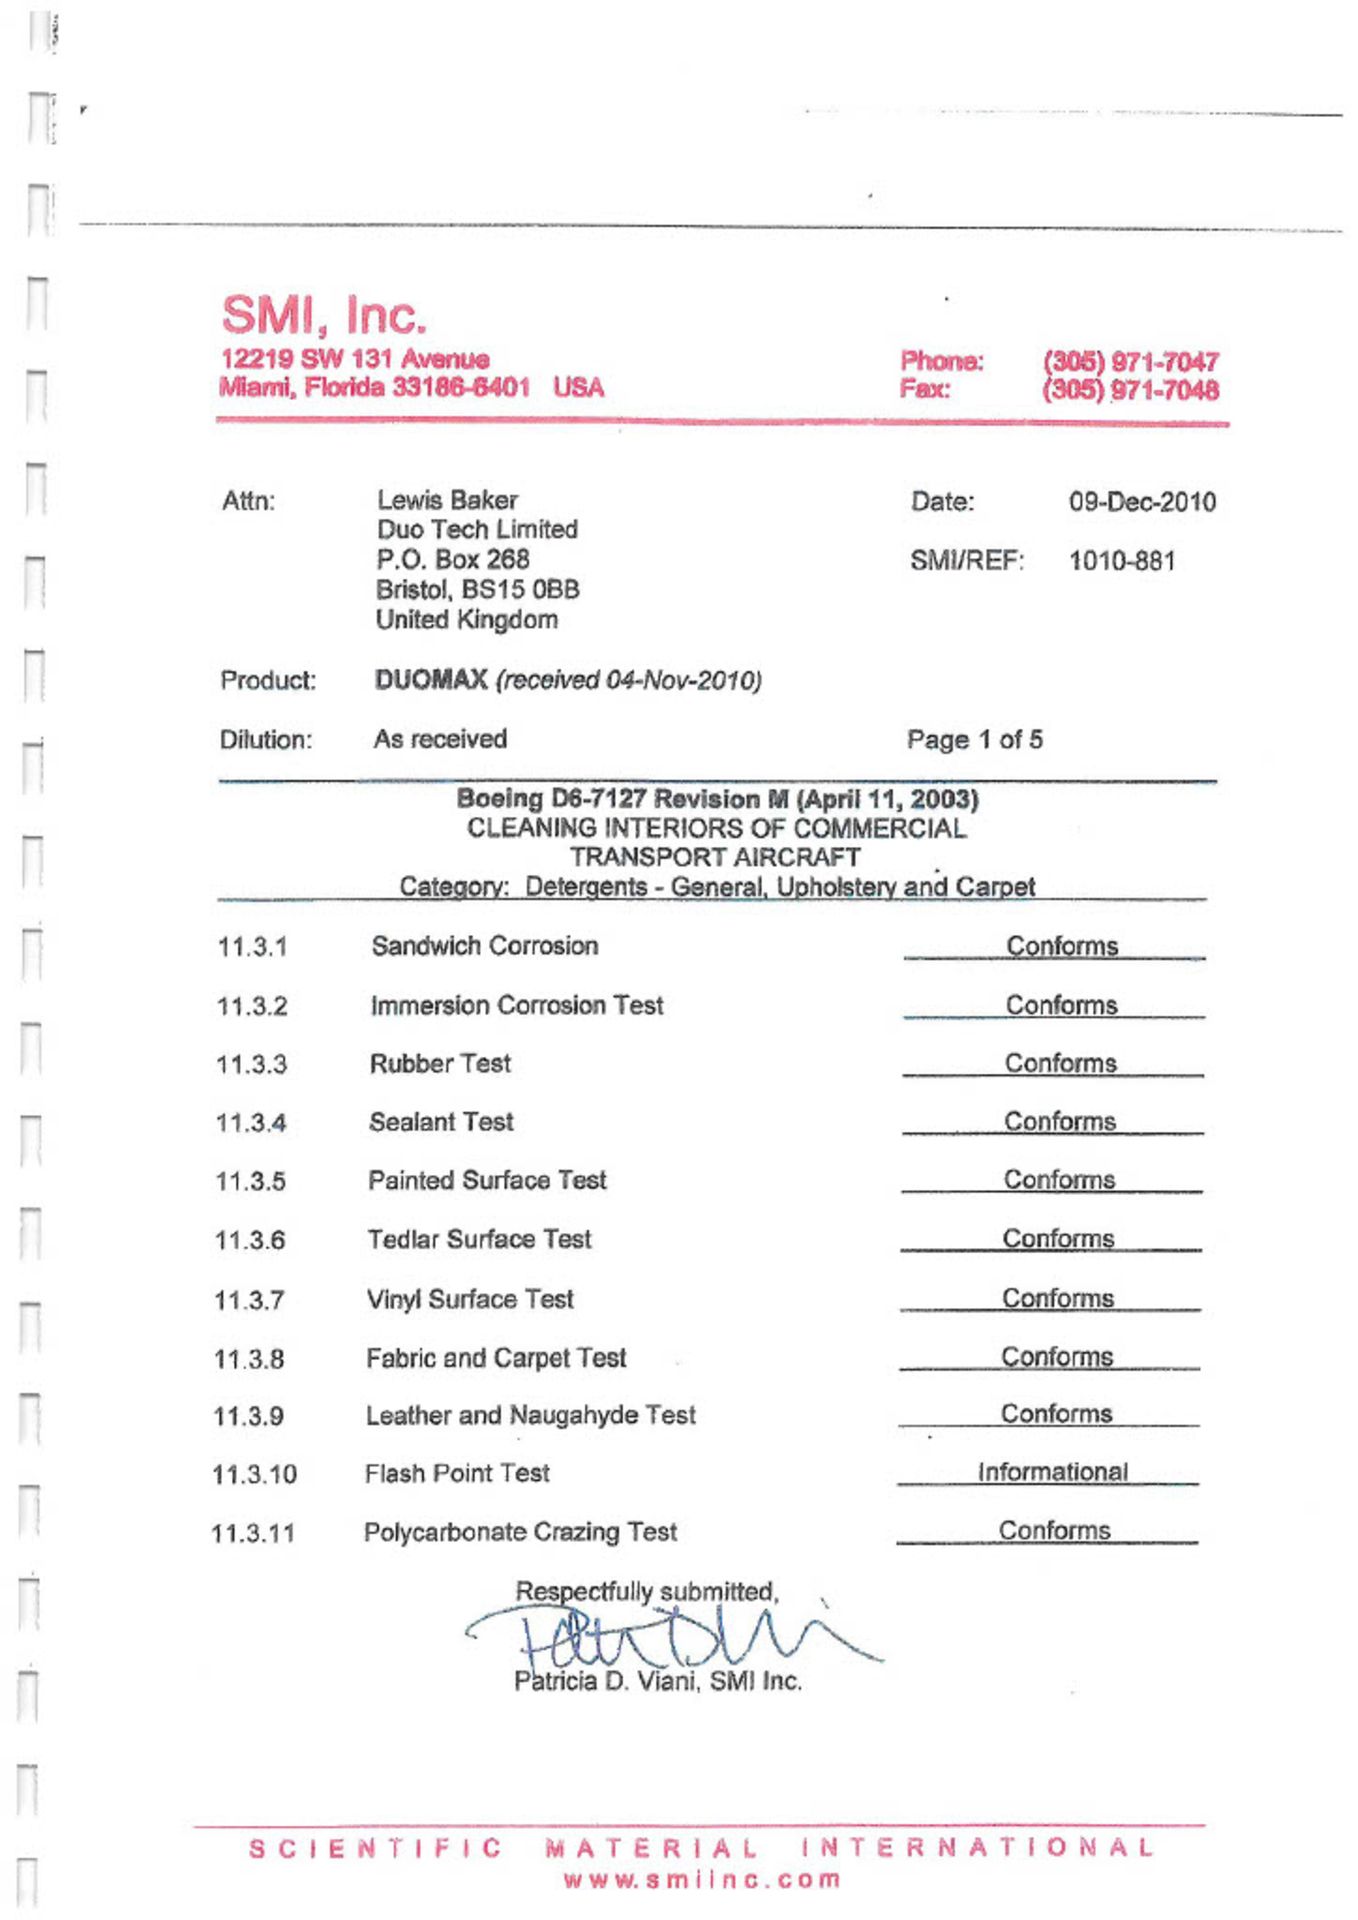 1000L IBC OF DUOMAX SUPER CONCENTRATED DISINFECTANT, MADE IN UK, MARCH 2020, ALL DOCUMENTS ATTACHED - Image 31 of 75